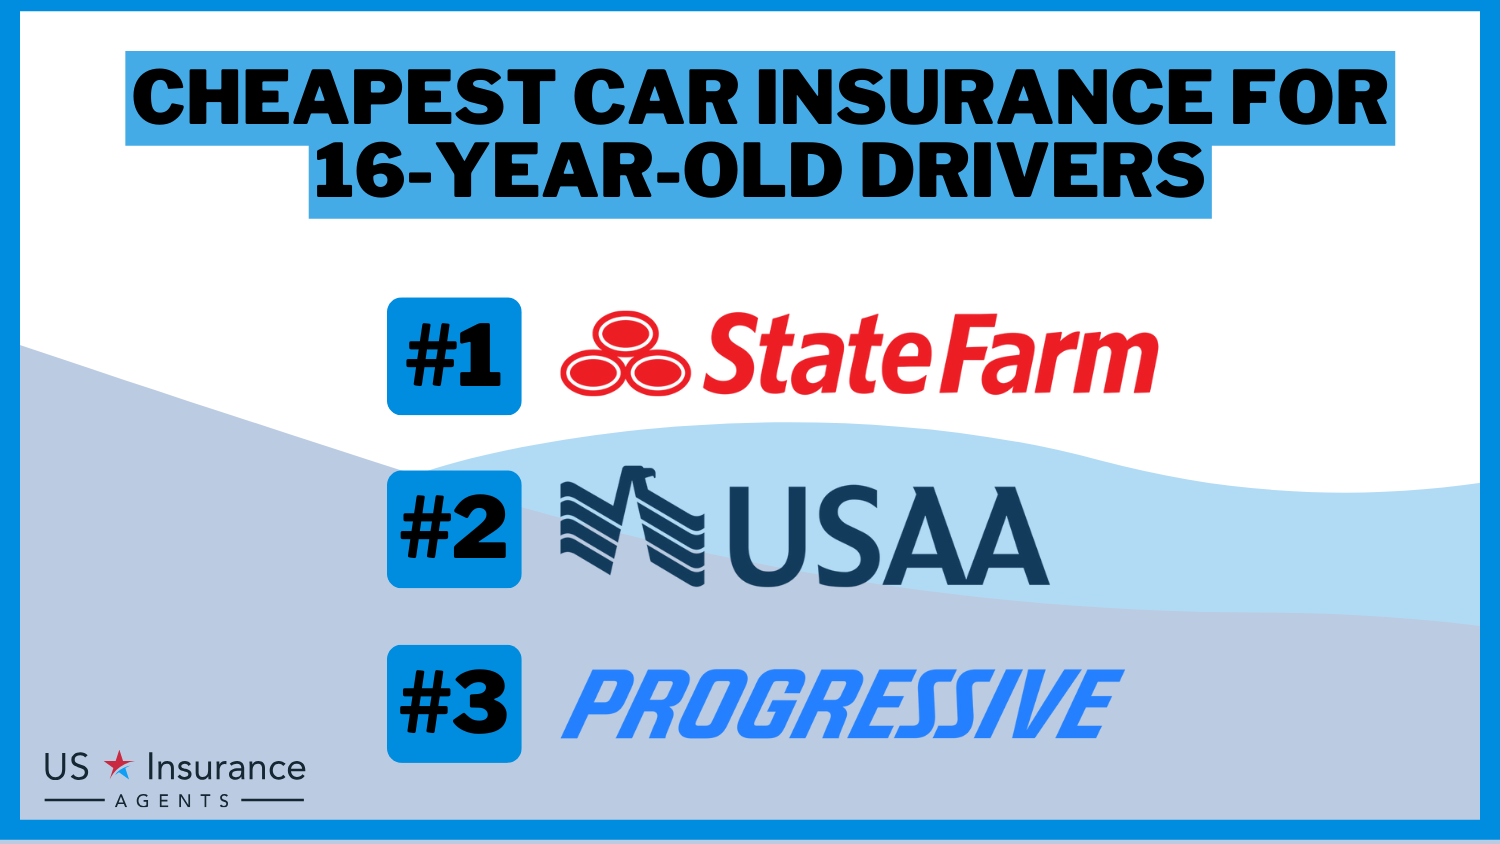 3 Cheapest Car Insurance for 16-Year-Old Drivers: State Farm, USAA, and Progressive.